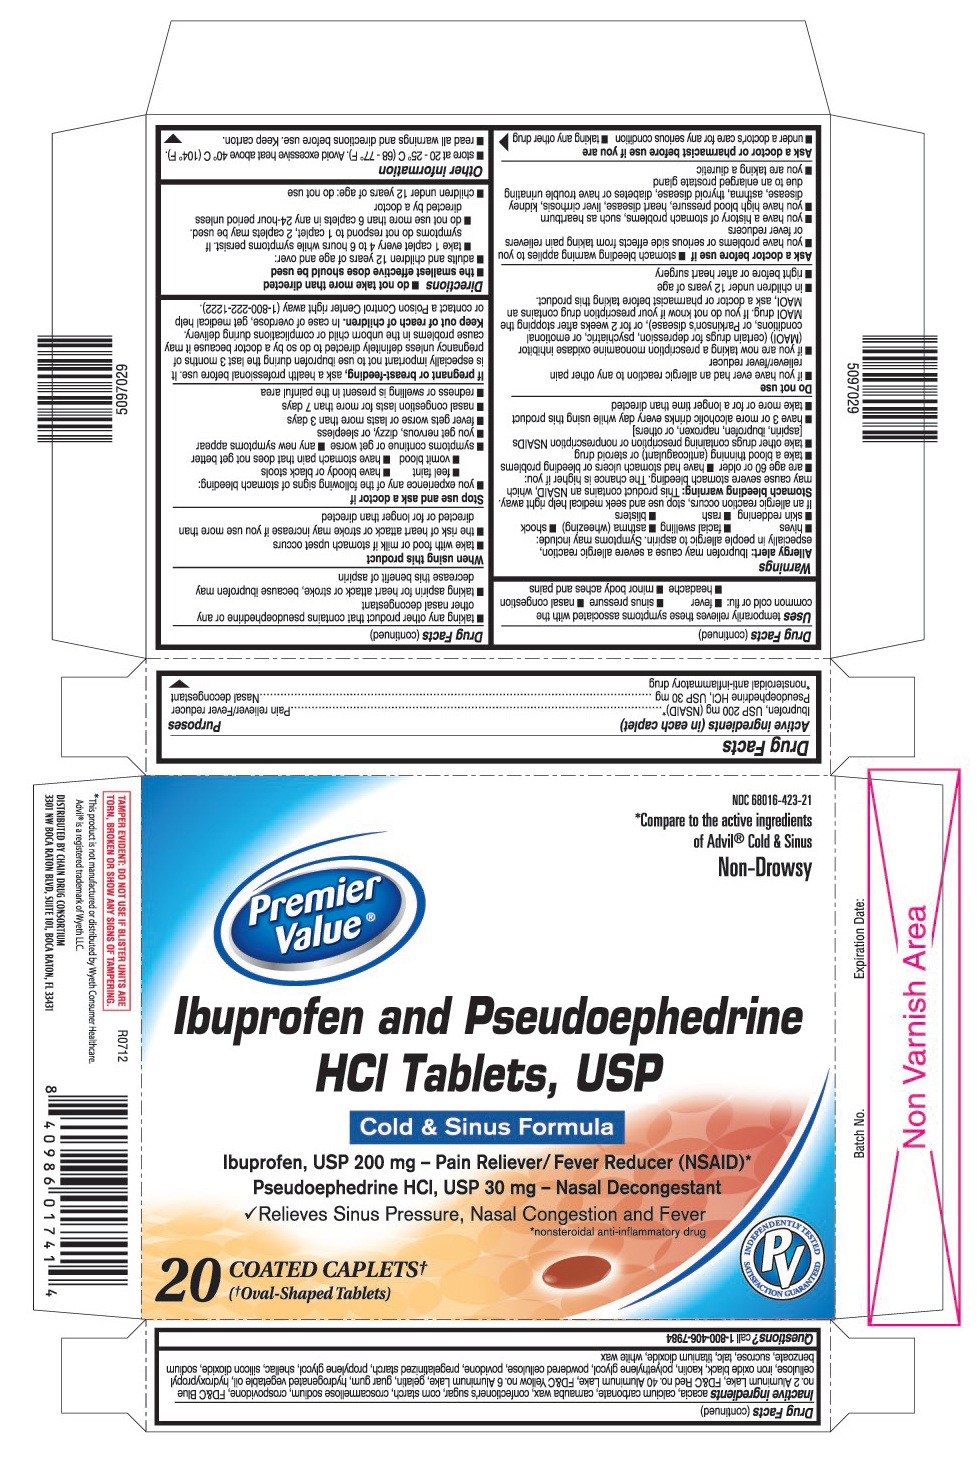 This is the 20 count blister carton label for Ibuprofen & Pseudoephedrine HCl  tablets, USP. 